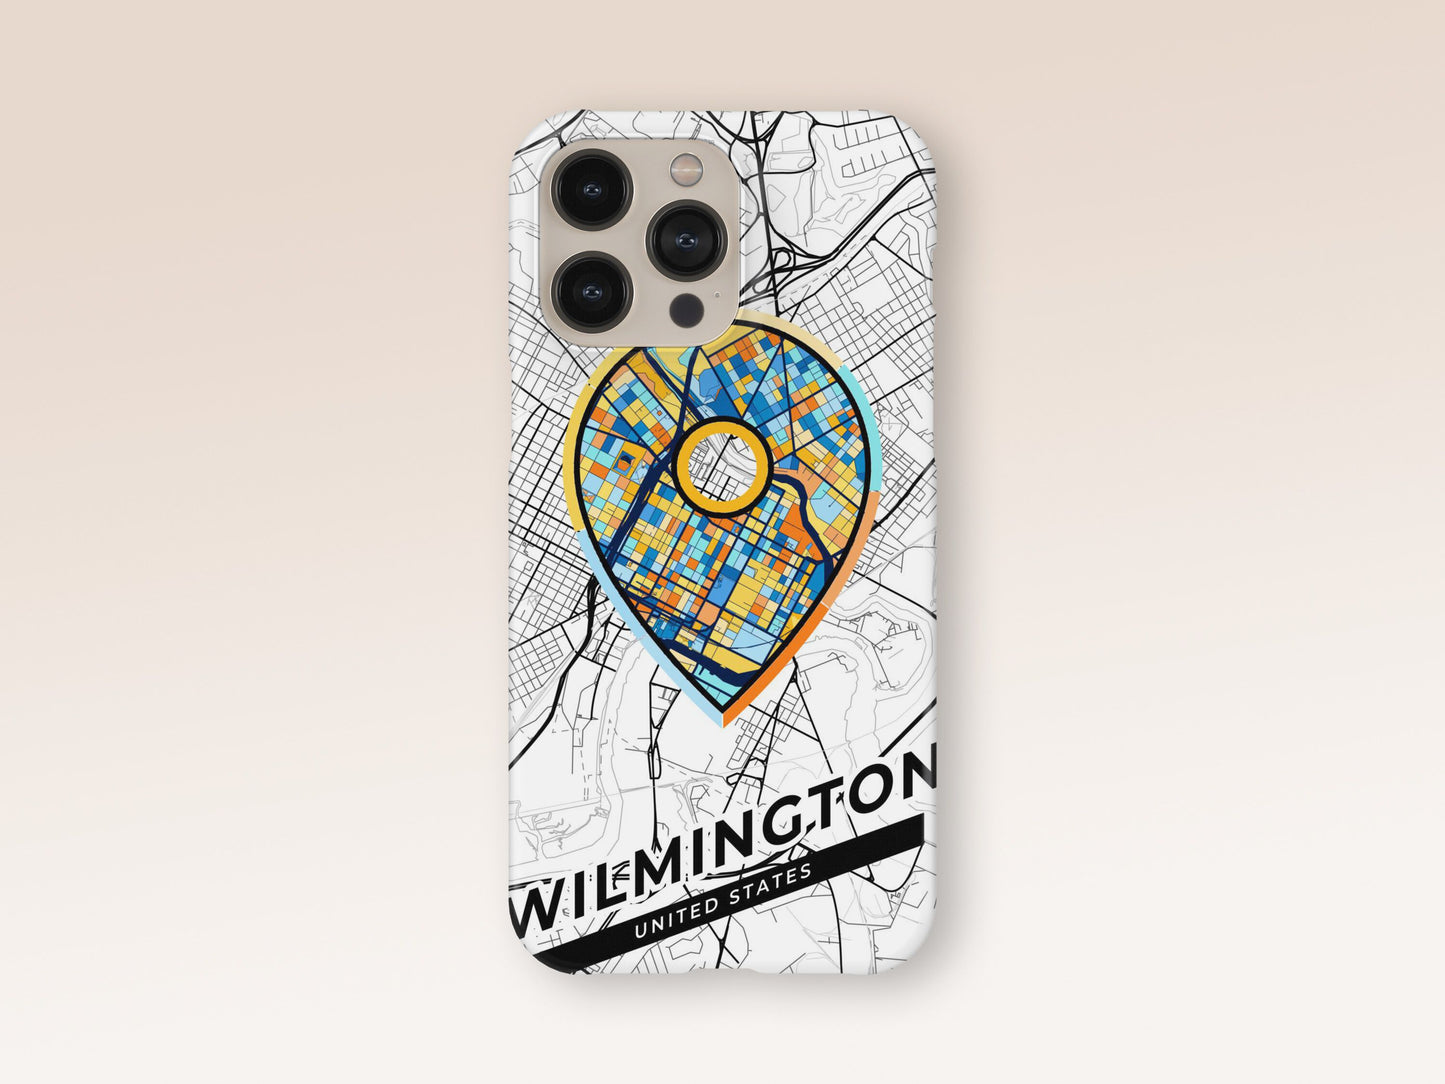 Wilmington Delaware slim phone case with colorful icon 1